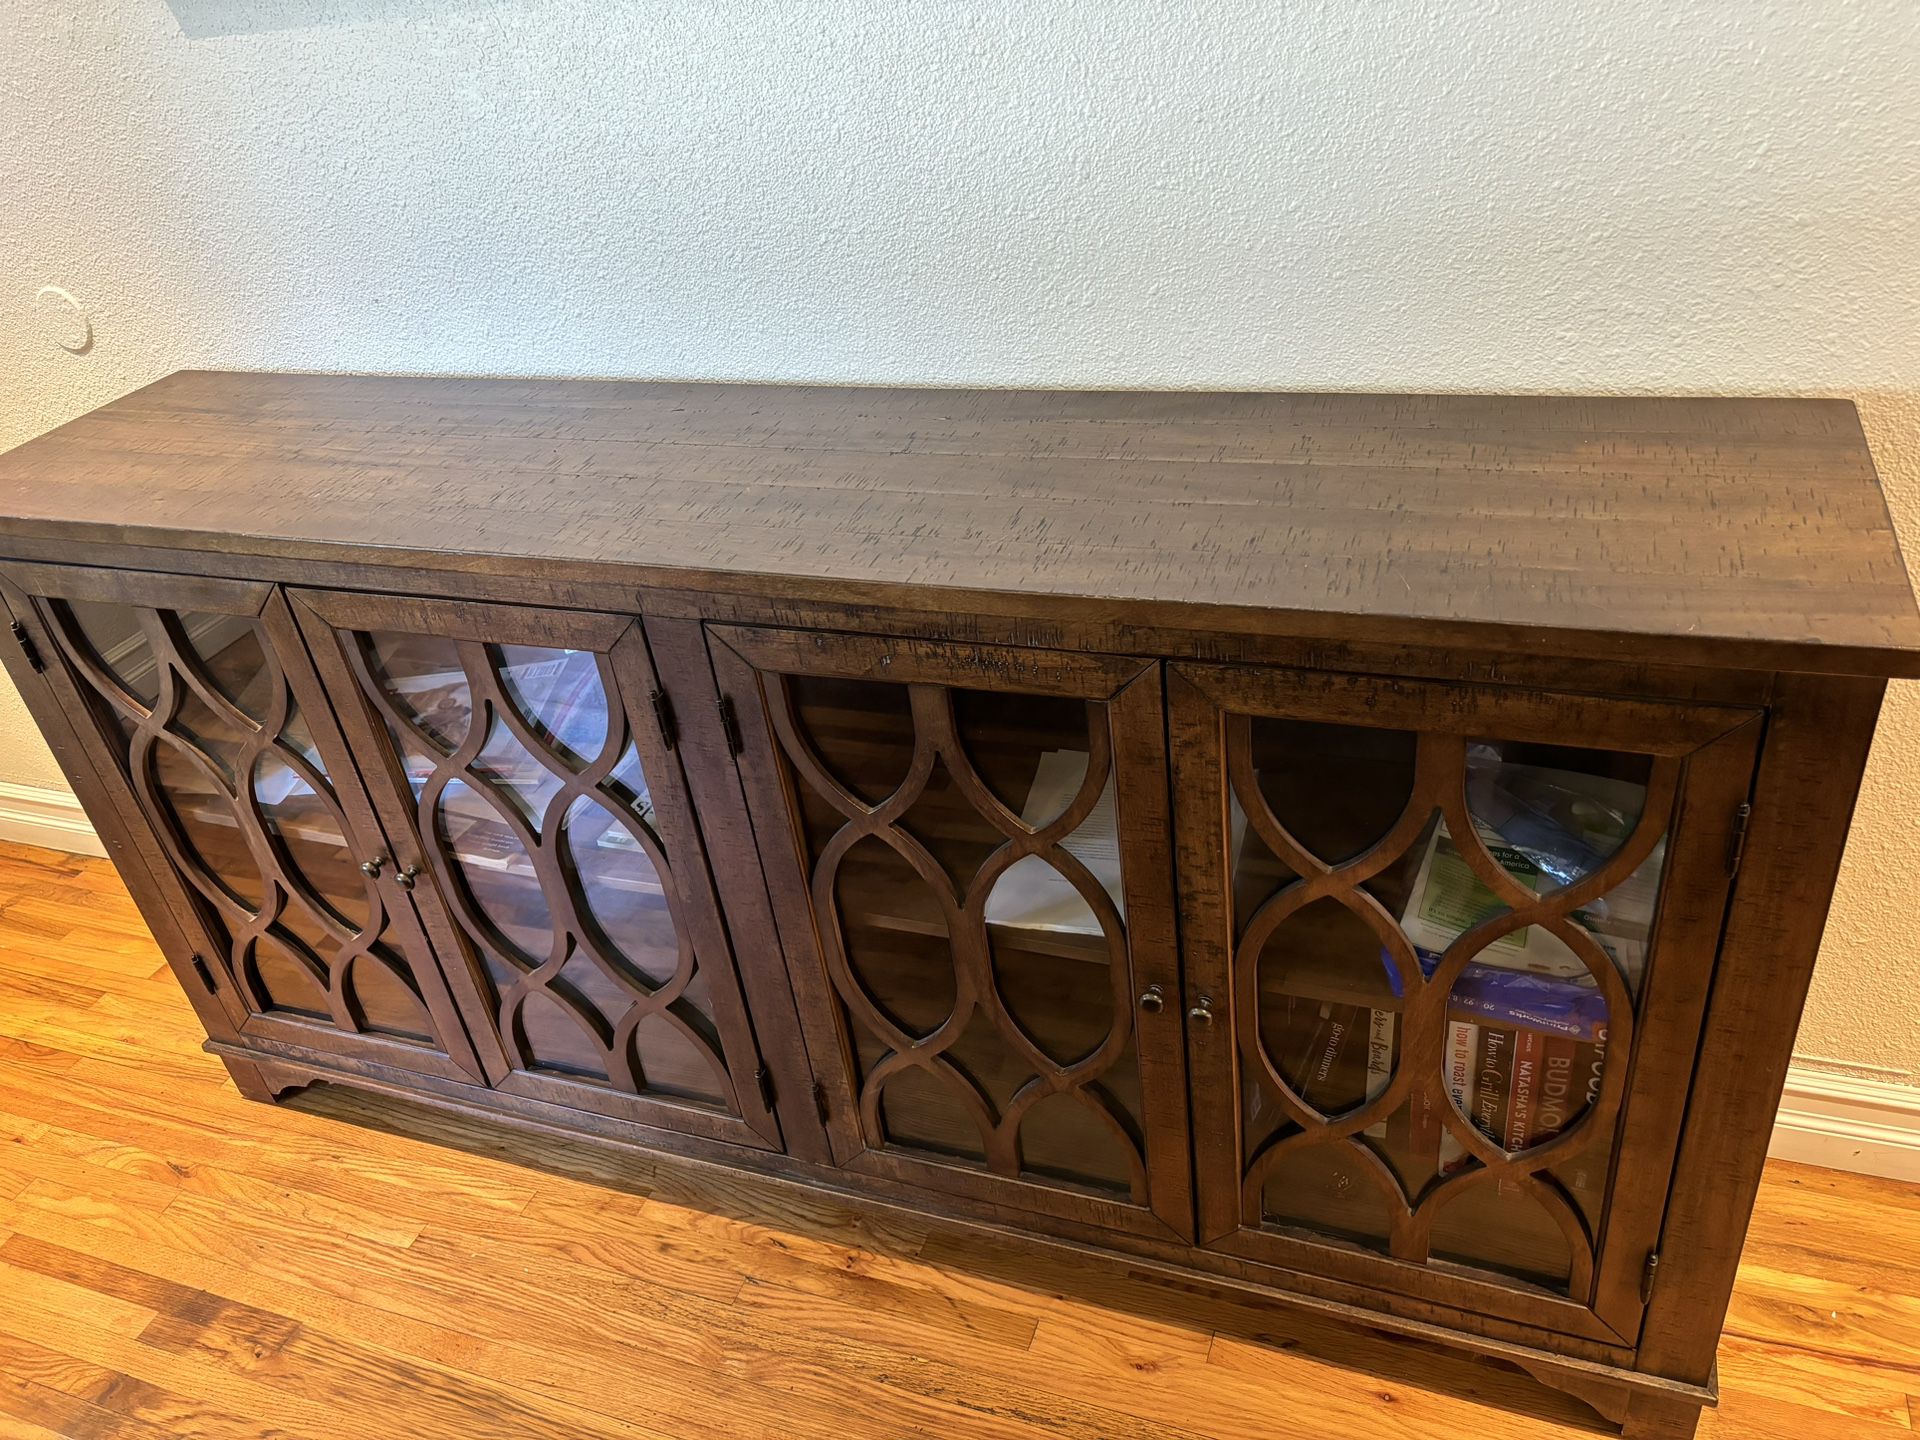 72” Console table